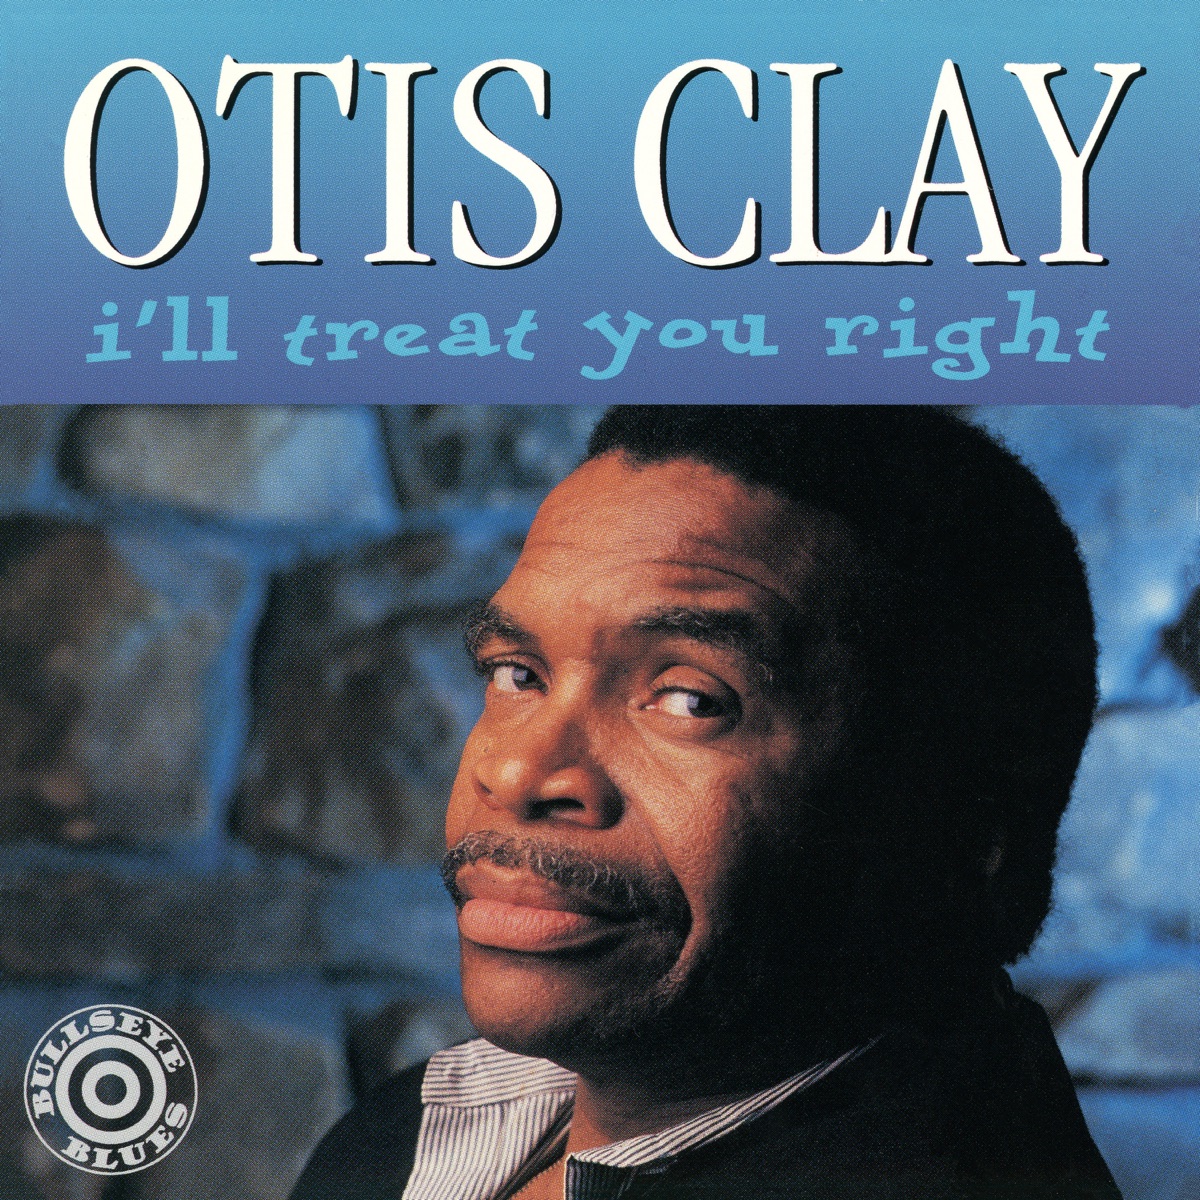 Walk a Mile in My Shoes by Otis Clay on Apple Music